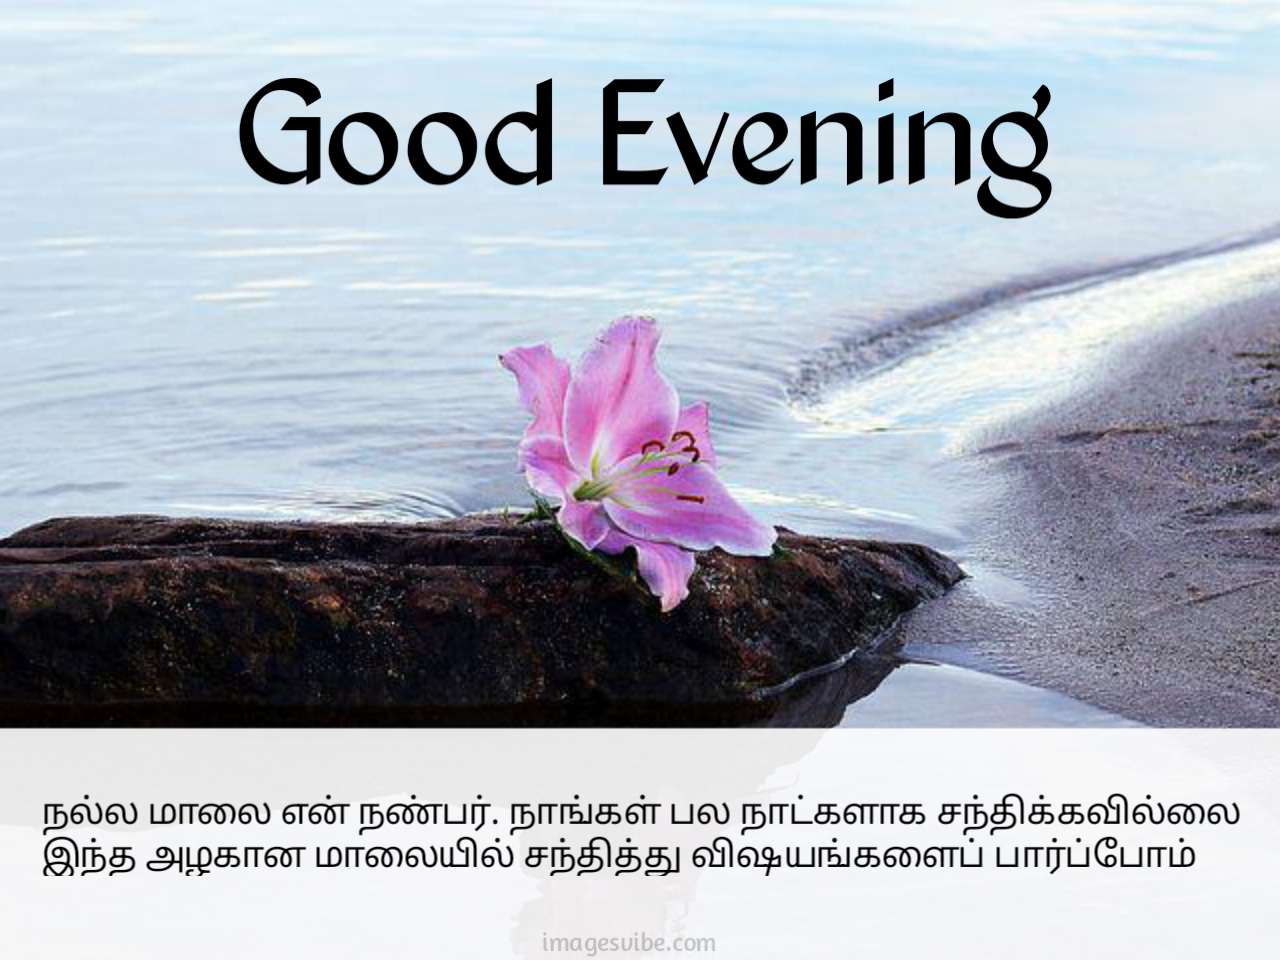 Good Evening Tamil Images